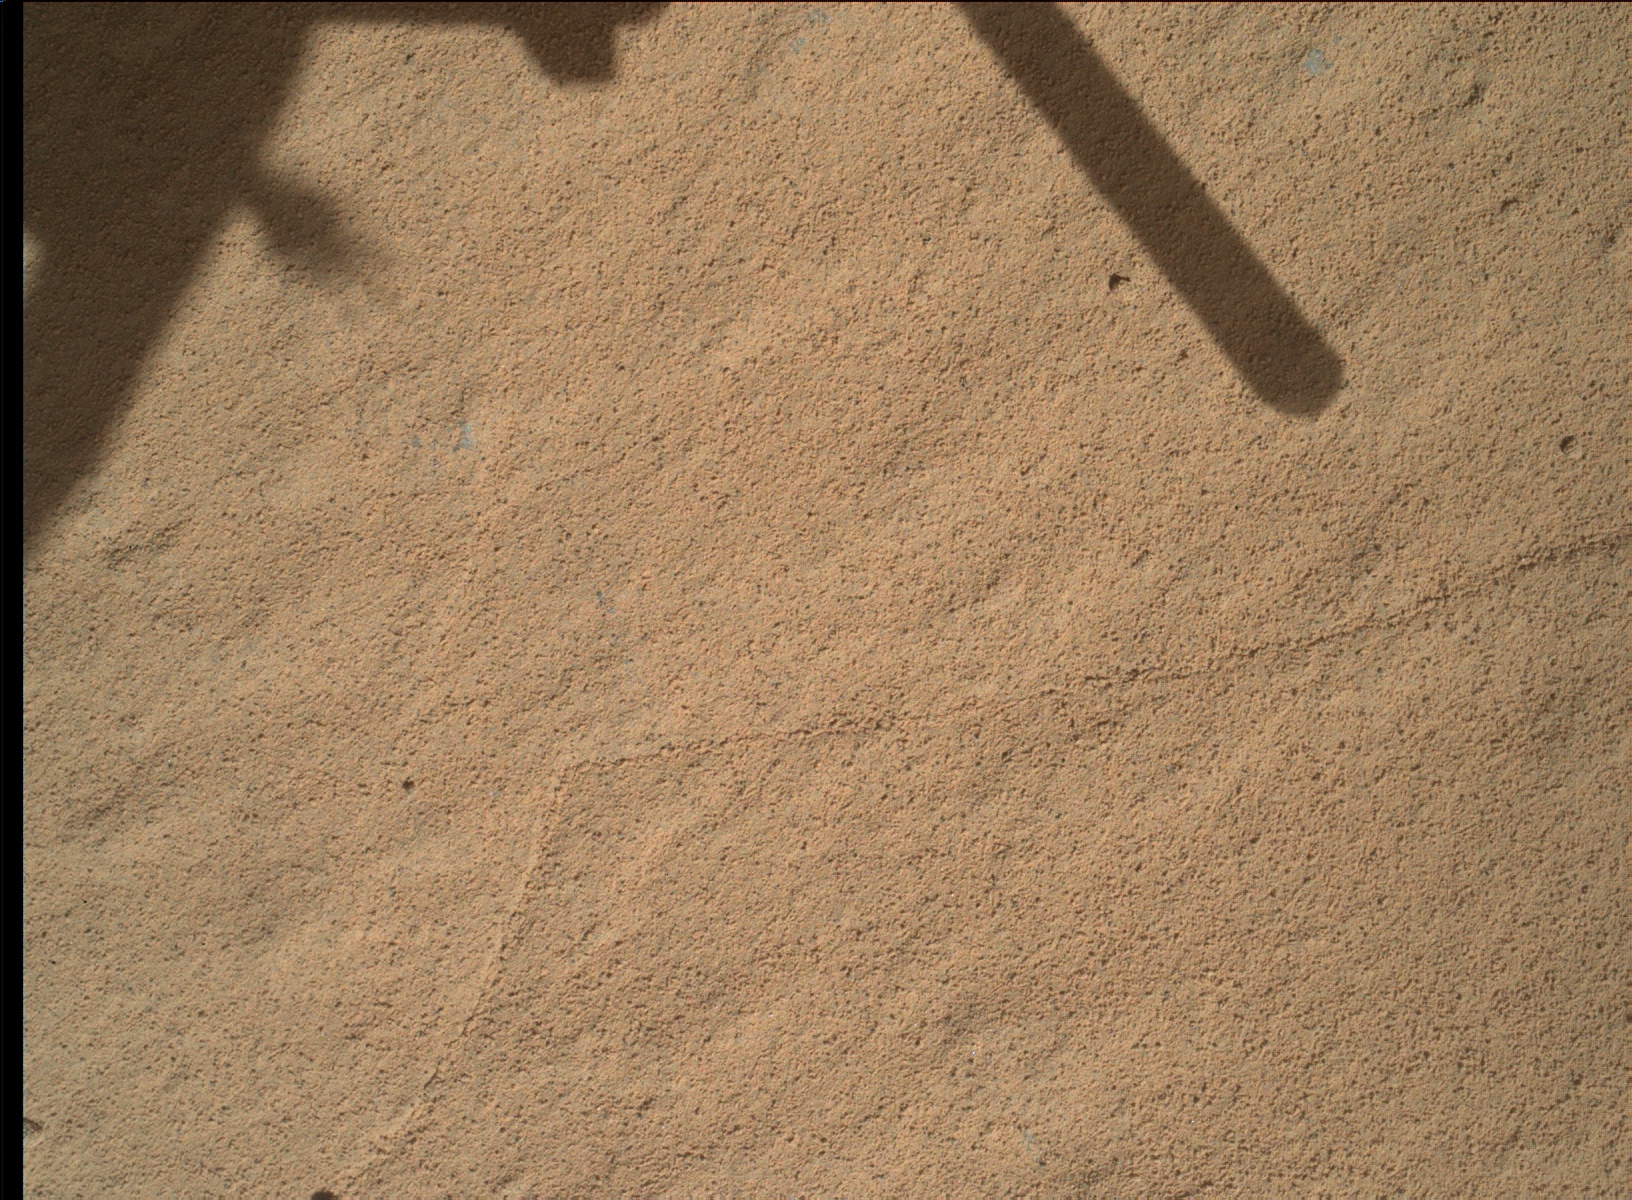 Nasa's Mars rover Curiosity acquired this image using its Mars Hand Lens Imager (MAHLI) on Sol 612, at drive 1330, site number 31